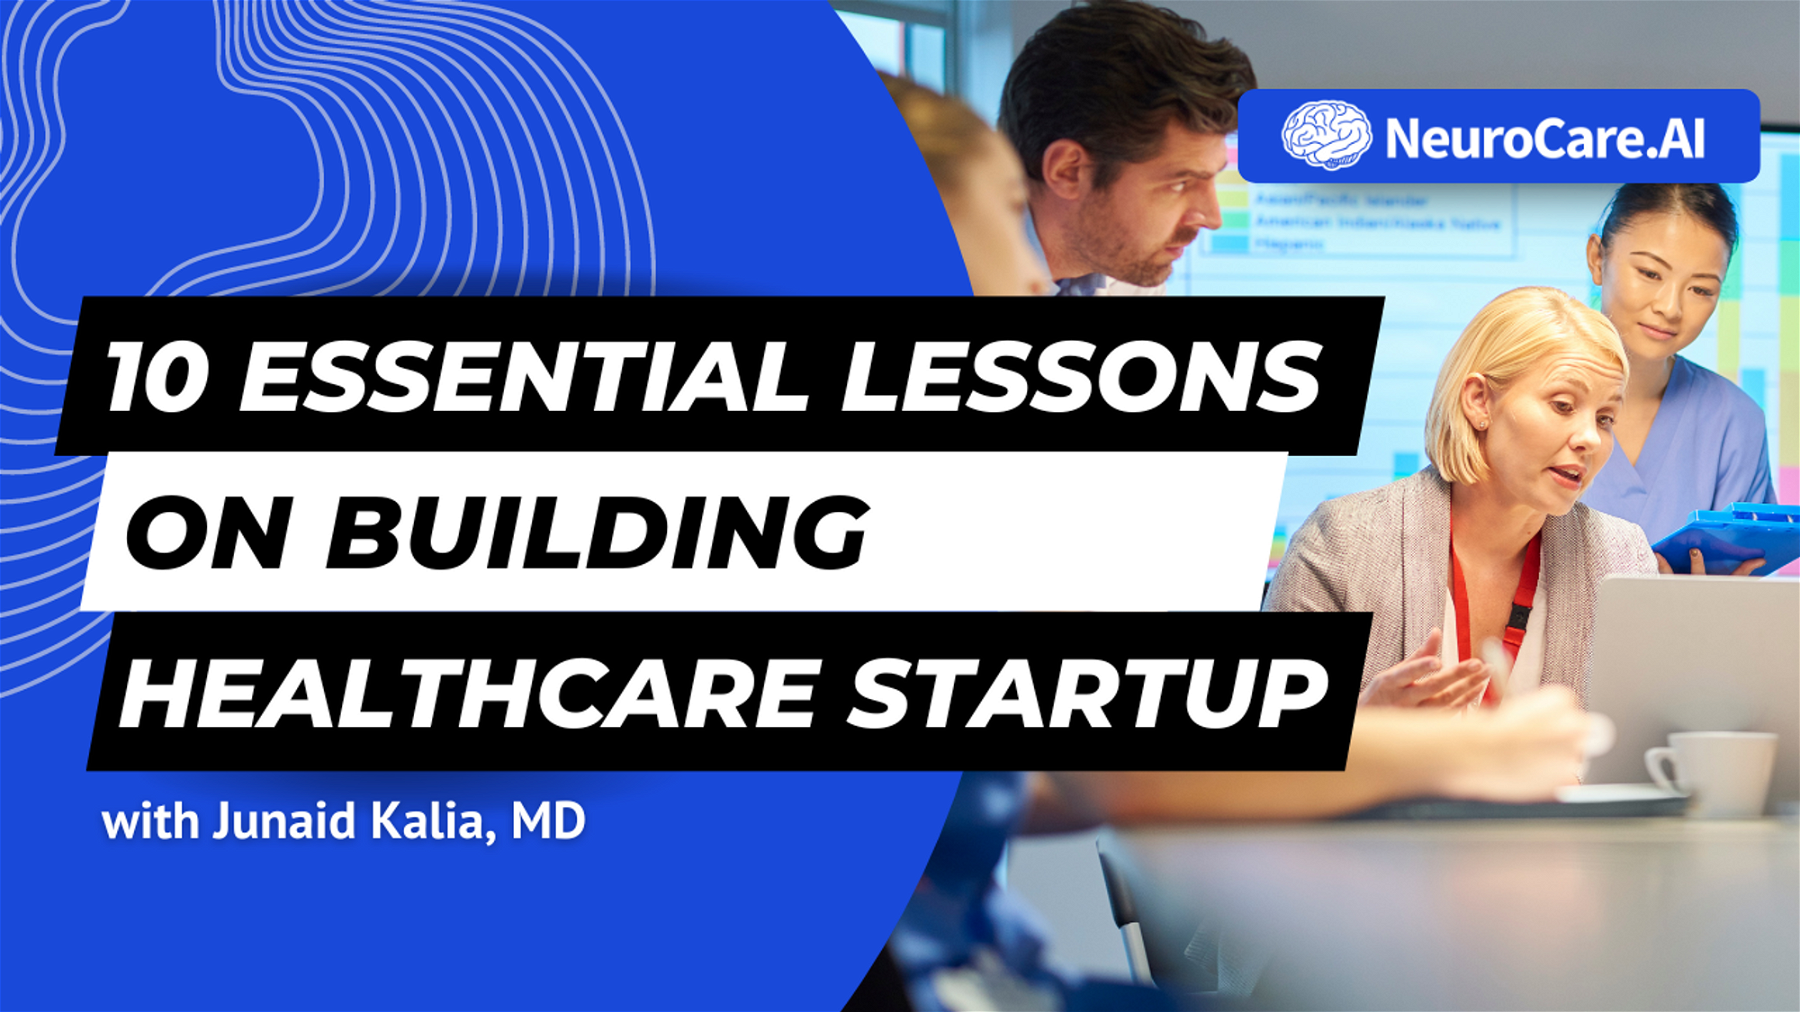 Digital Health Startup Series #7: 10 Essential Lessons on Building Healthcare Startup